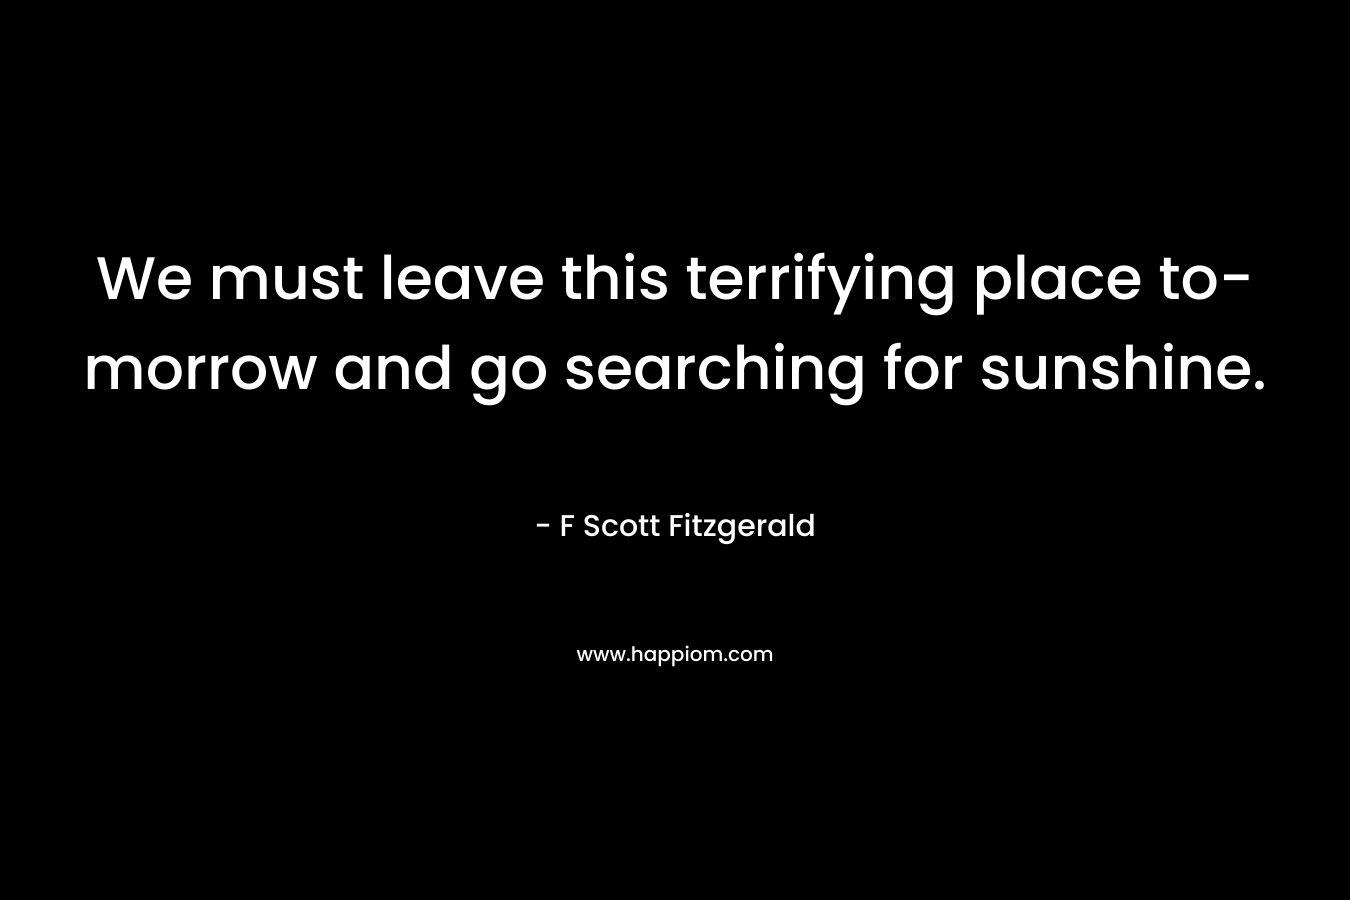 We must leave this terrifying place to-morrow and go searching for sunshine. – F Scott Fitzgerald